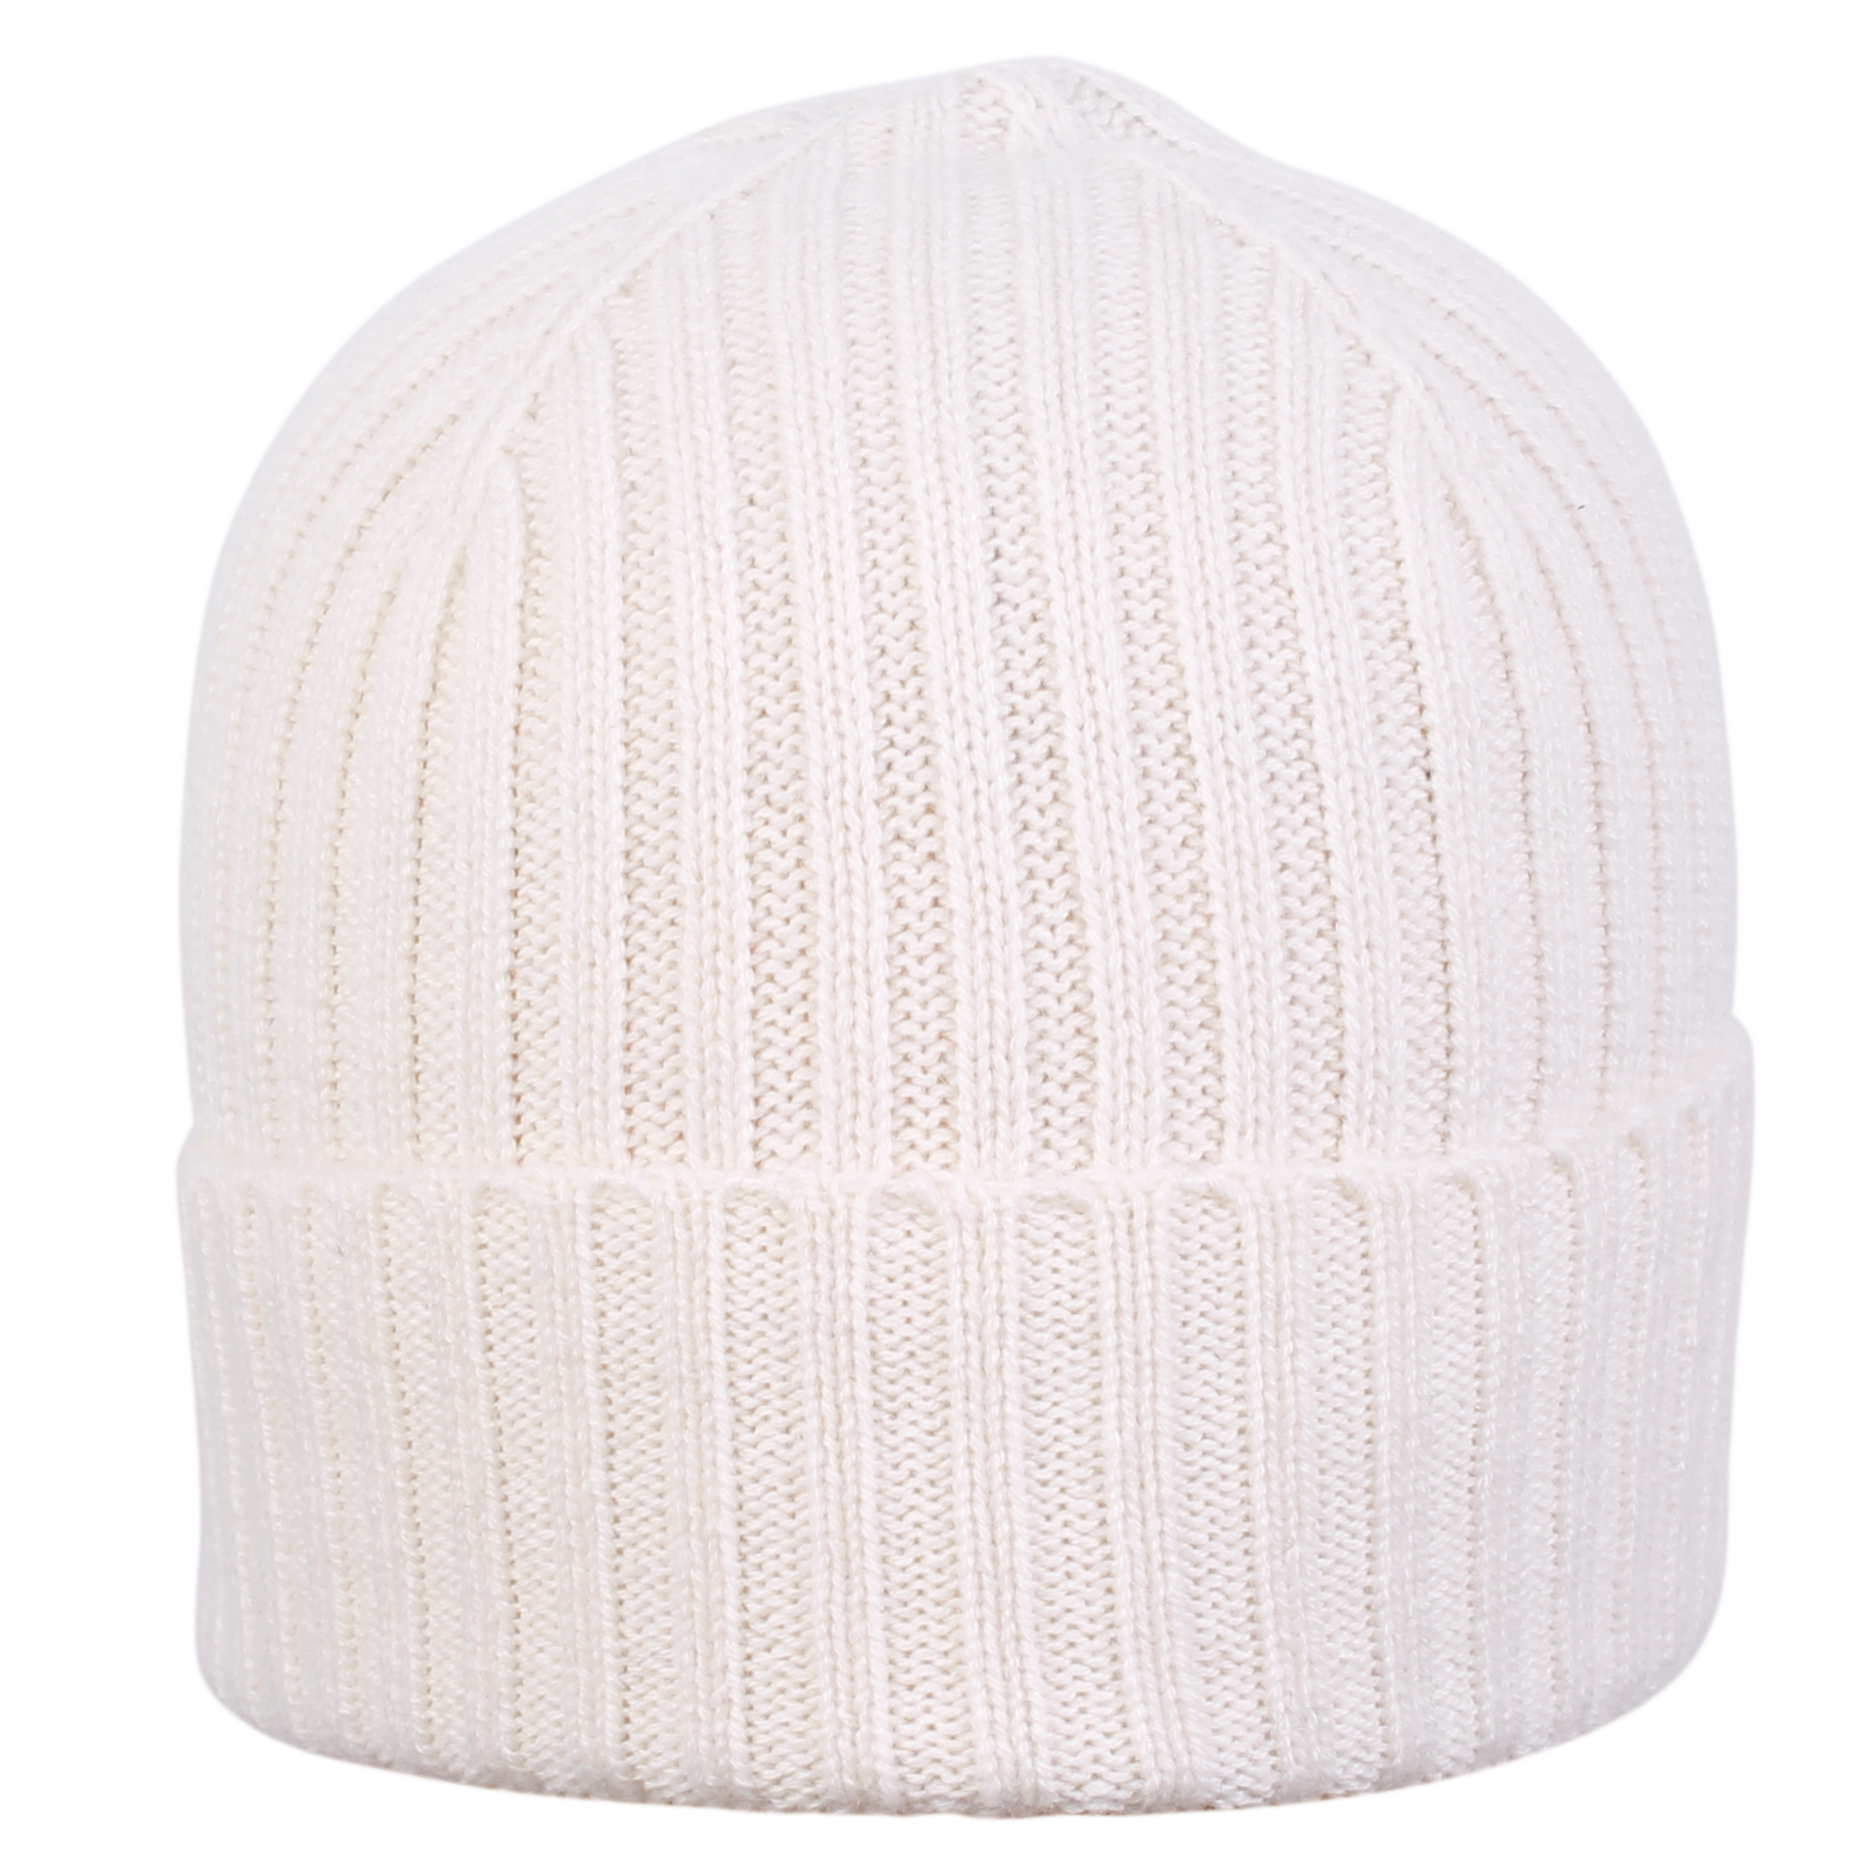 Pure Cashmere Beanie (Choice of Colors) by Wigens